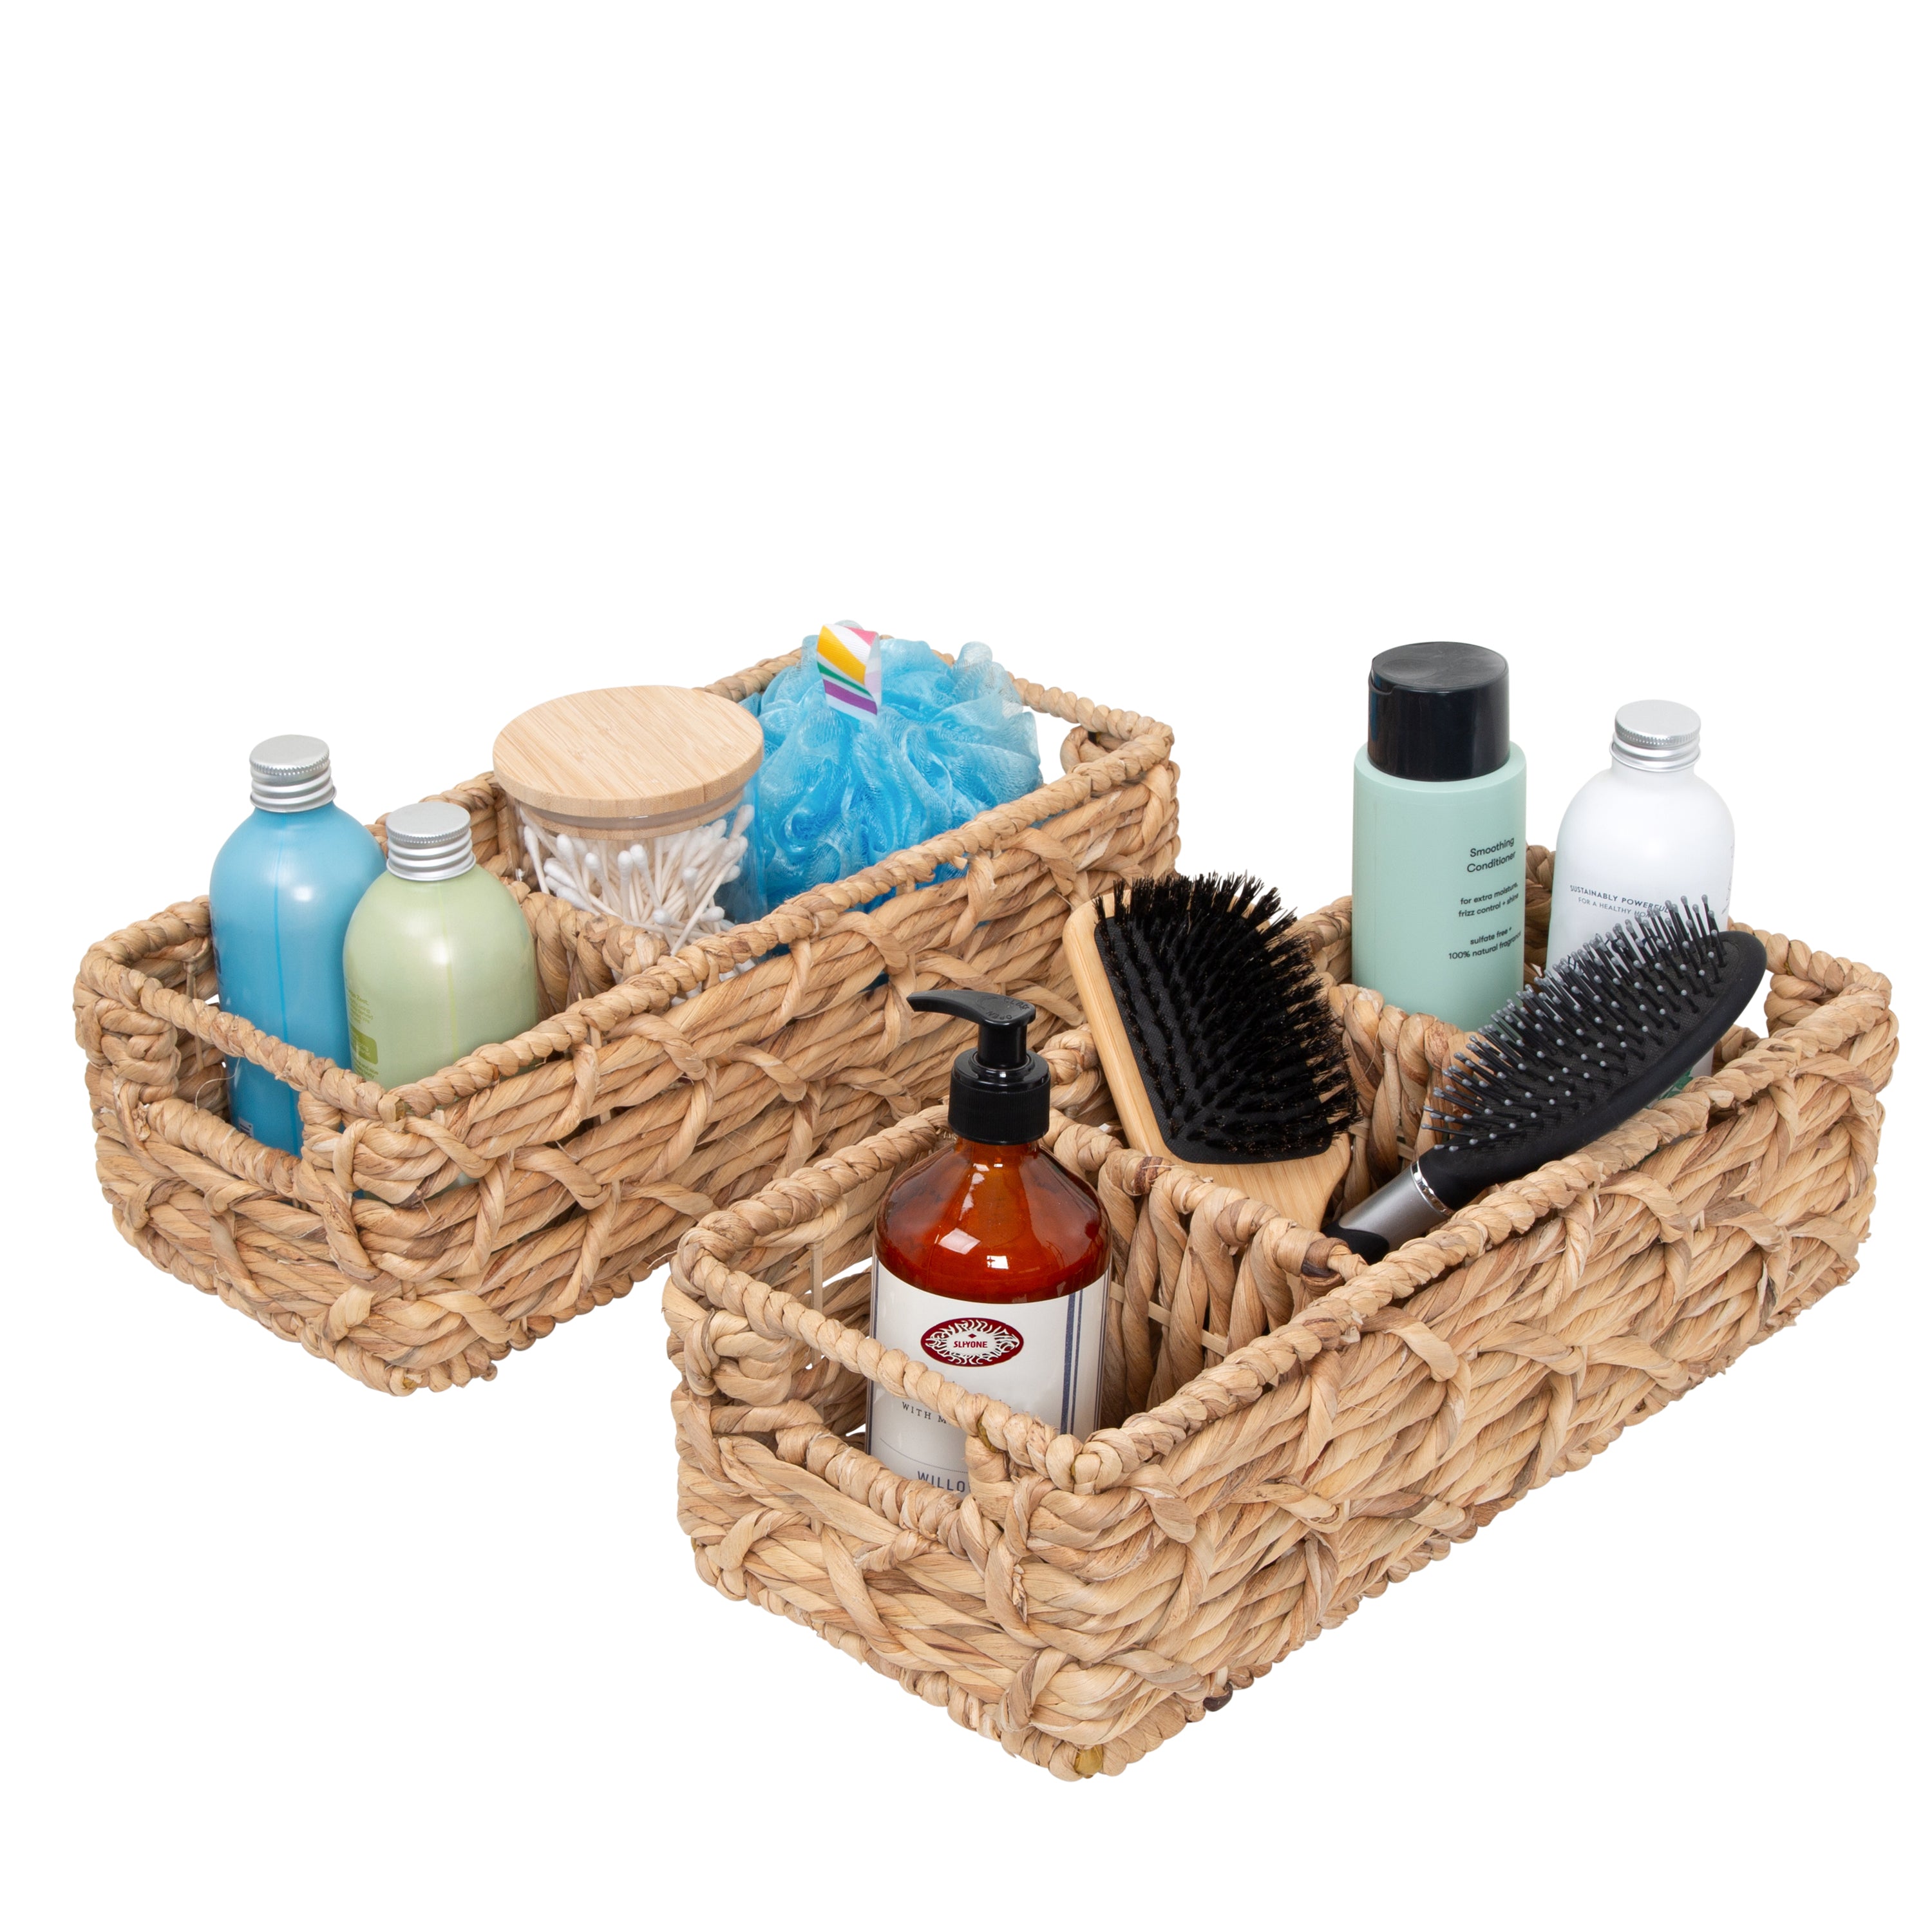 Dracelo Multiuse Hand Woven Plastic Wicker Basket with Divider for Organizing, Countertop Organizer Storage, Gray Wash